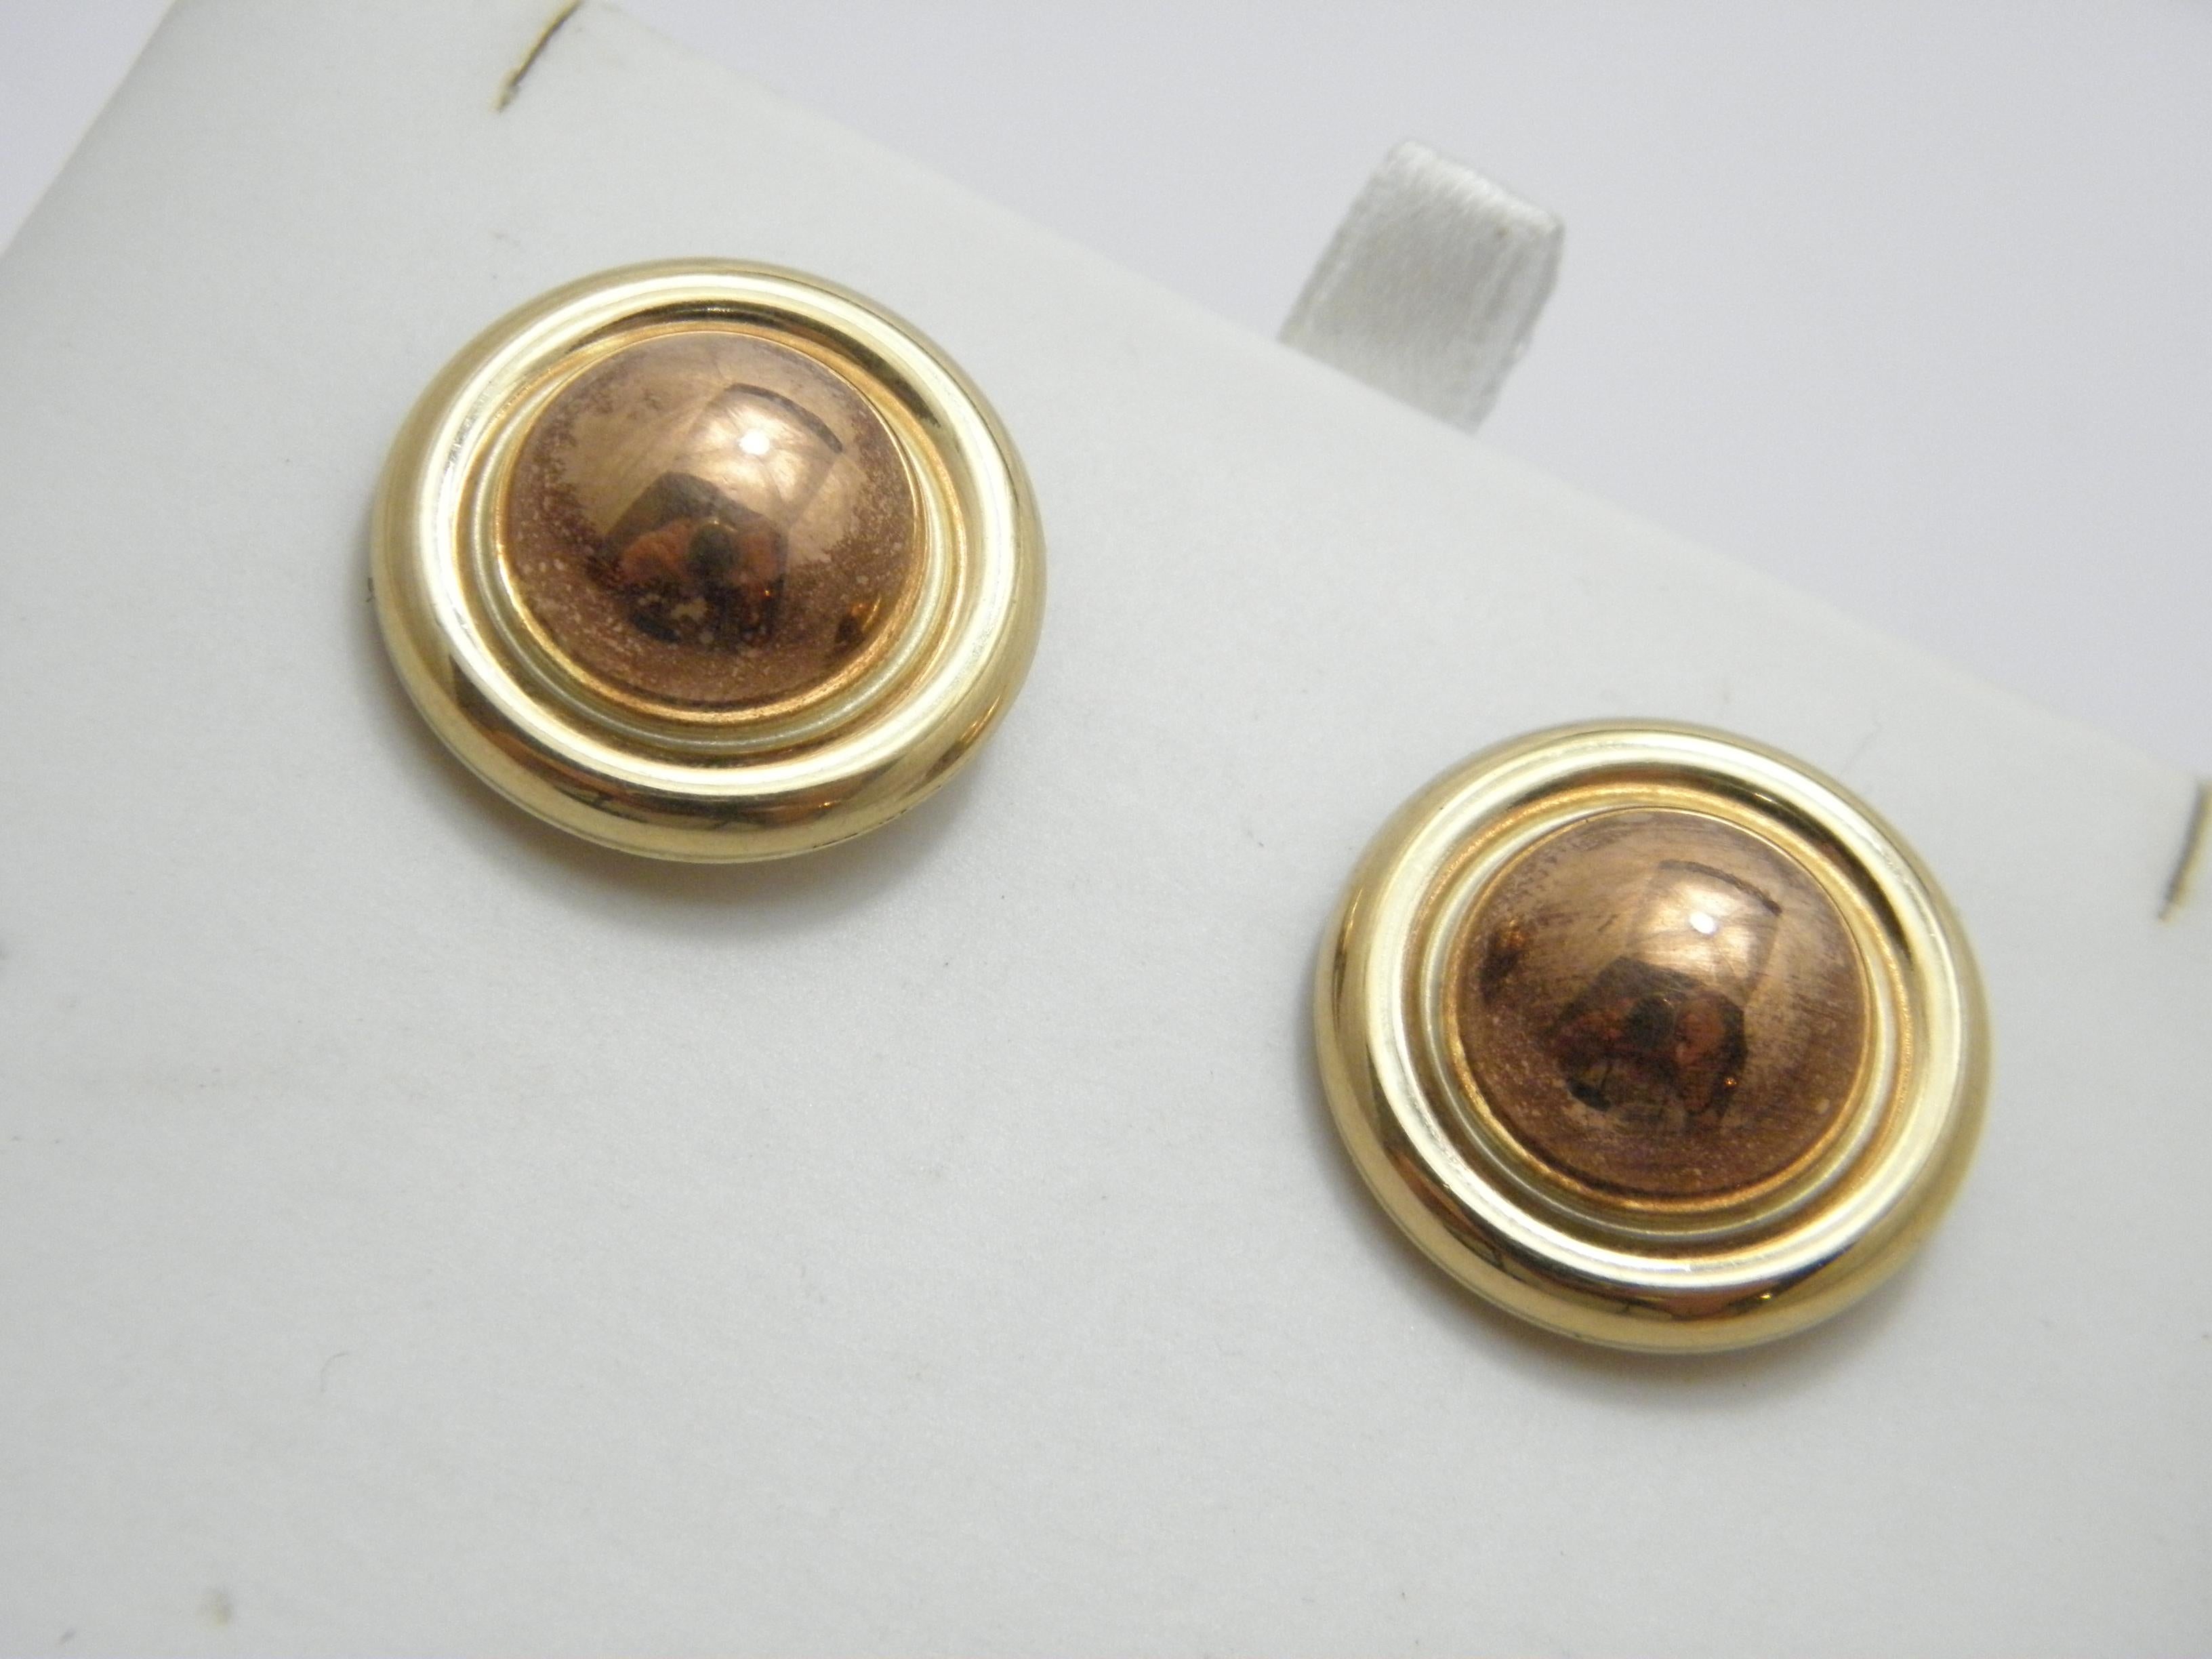 A very special item for you to consider:

9CT GOLD VERY LARGE HALF BALL STUD EARRINGS

DETAILS
Material: 375/000 9ct SolidRose and Yellow Gold
Style: Classic ball stud earrings, absolutely huge so sure to get noticed
Fastening: Push through posts